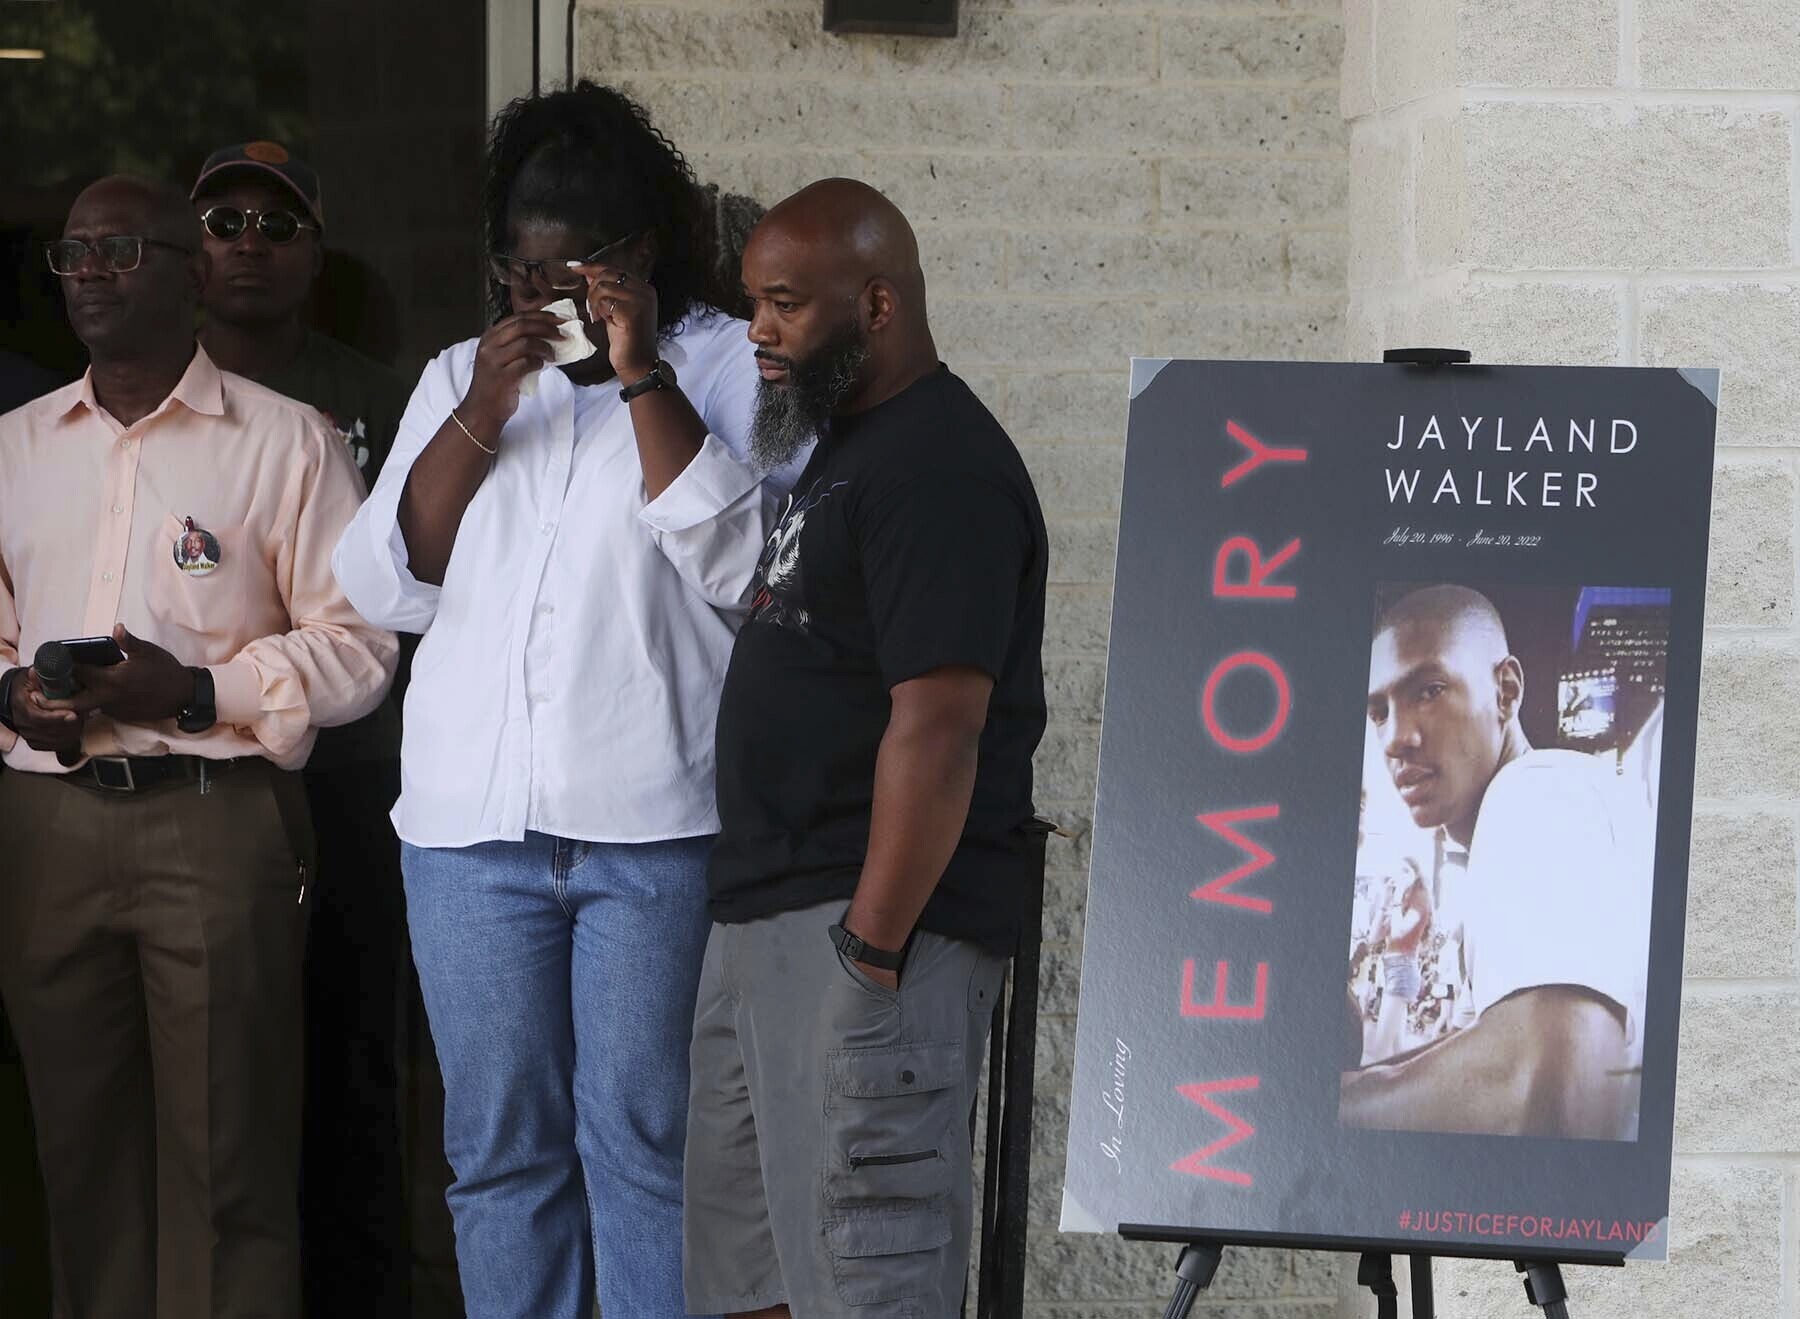 Family members of Jayland Walker stand behind the podium during a news conference at St. Ashworth Temple Church of God in Christ, Monday, July 11, 2022, in Akron, Ohio. (Karen Schiely—Akron Beacon Journal/AP)